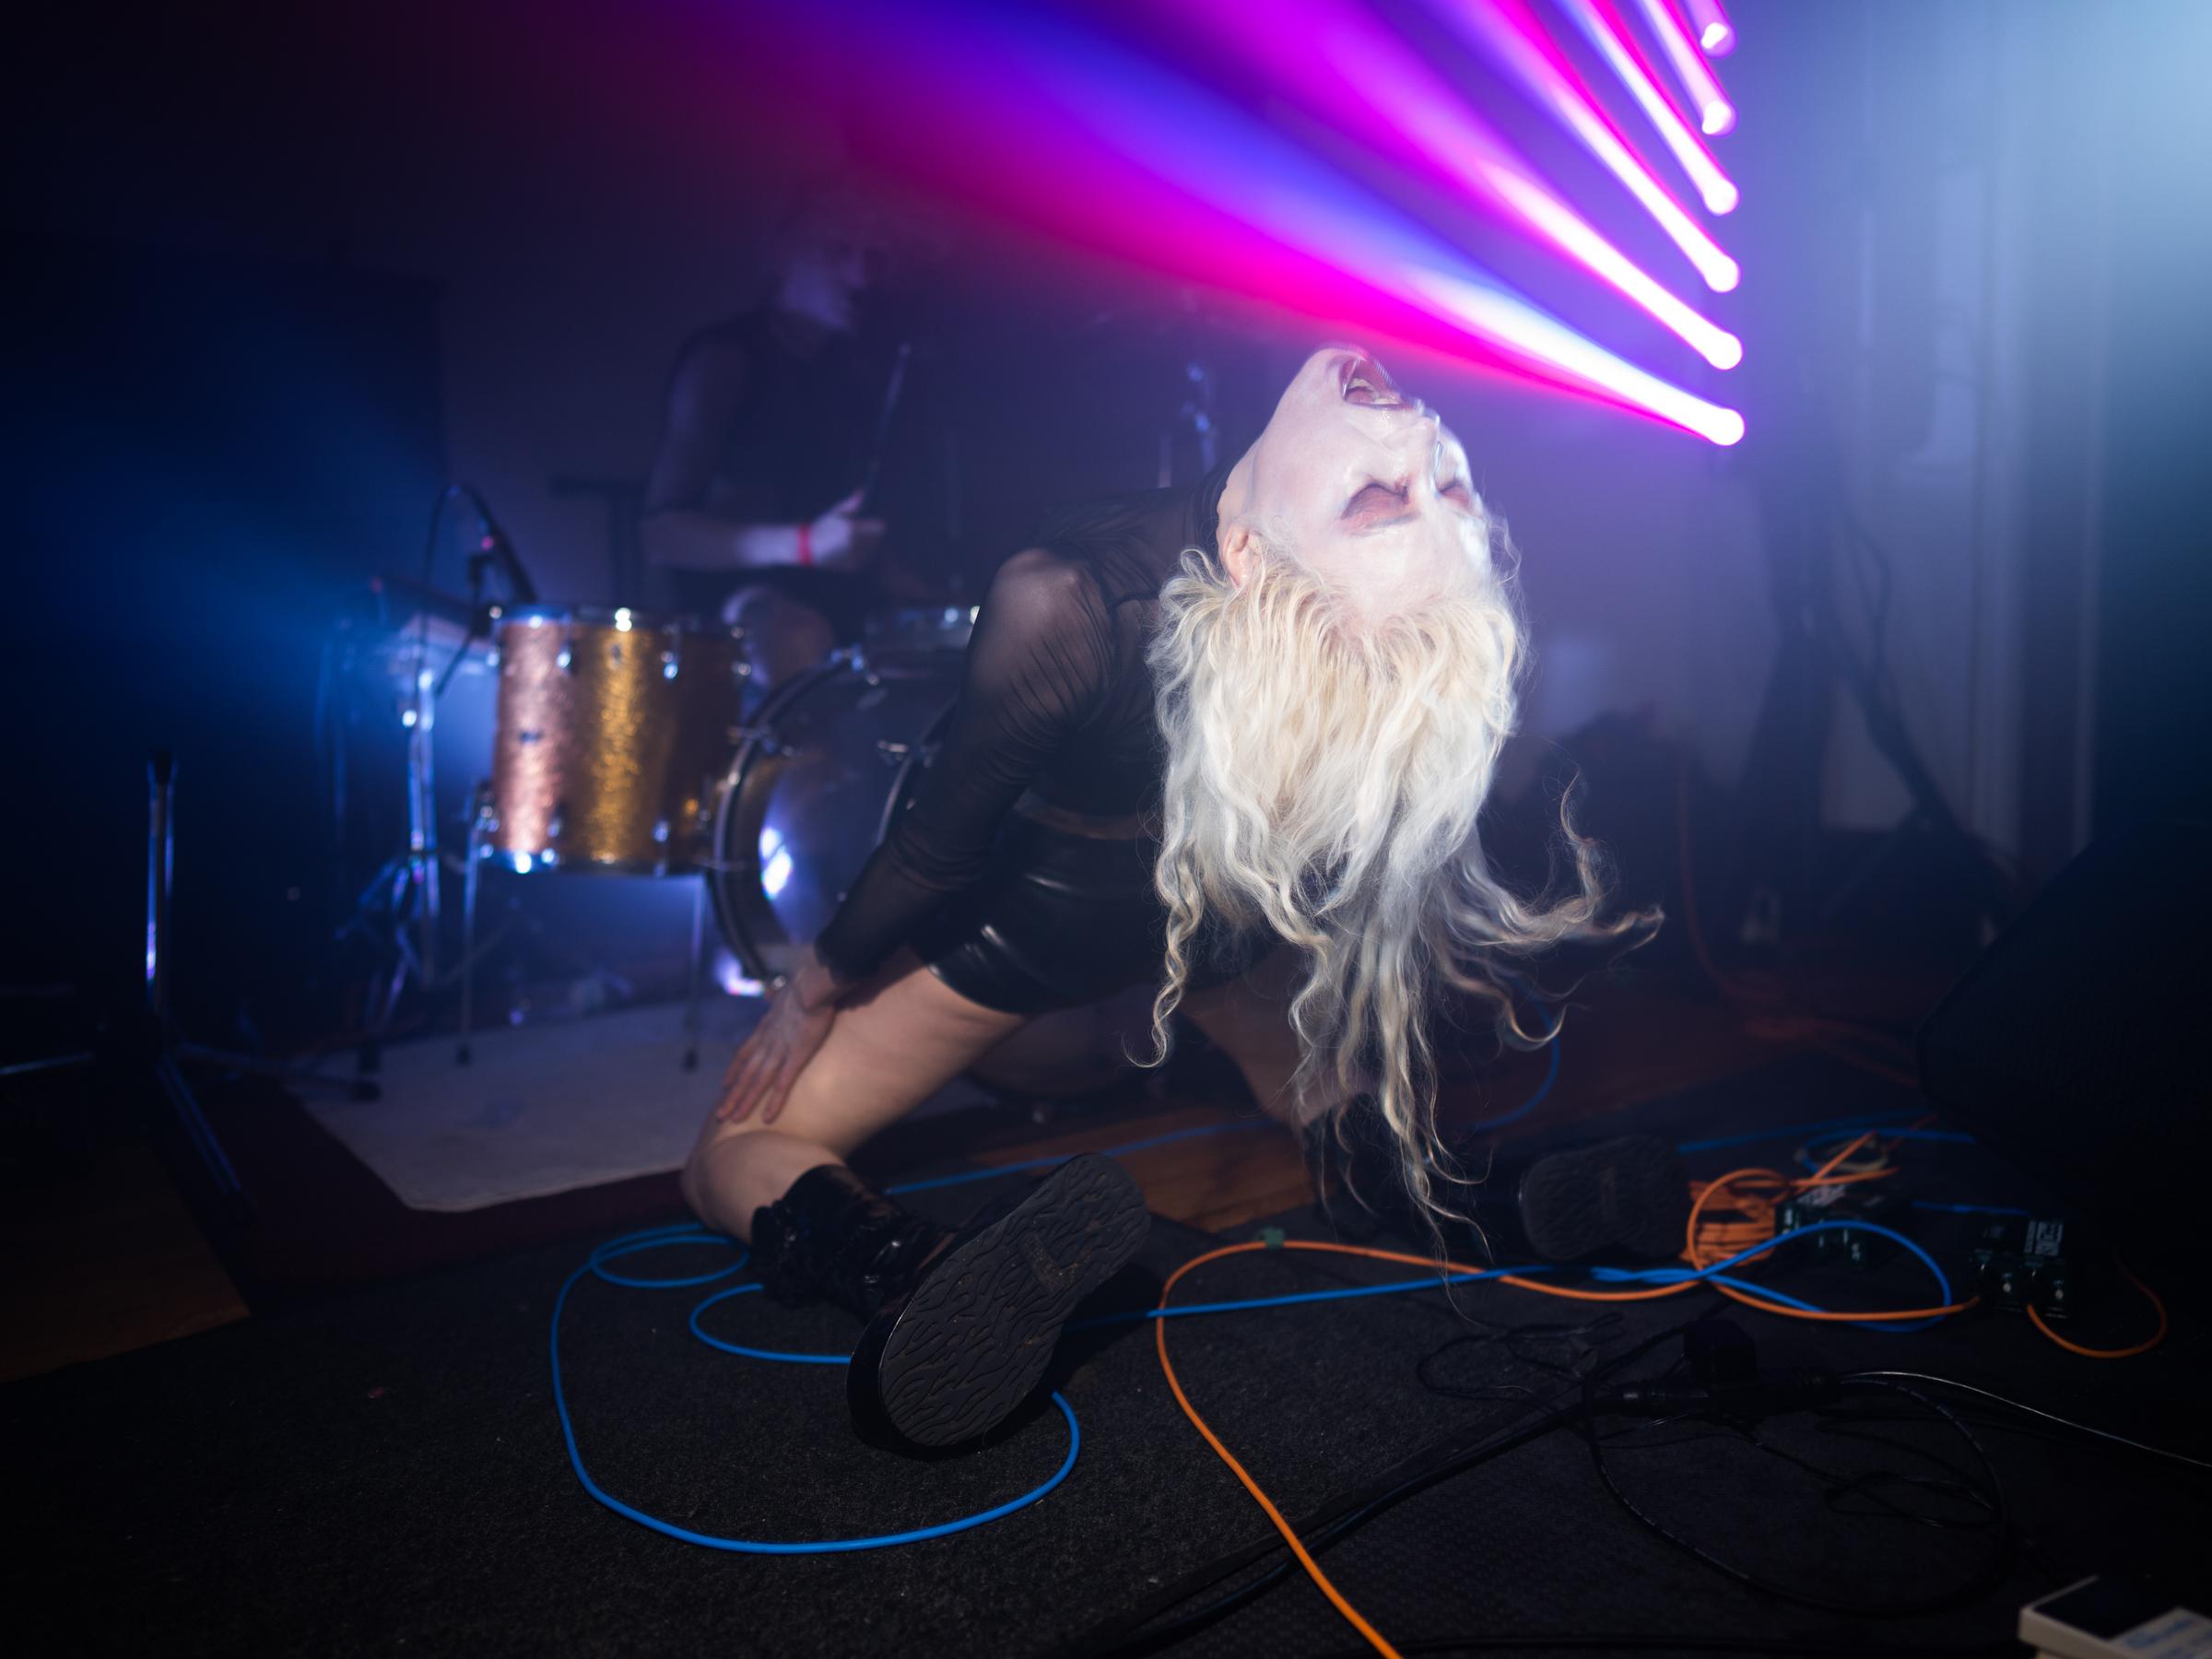 Performer with bleached blonde hair and white makeup kneels with head back in front of drum set, with purple and blue lighting above.